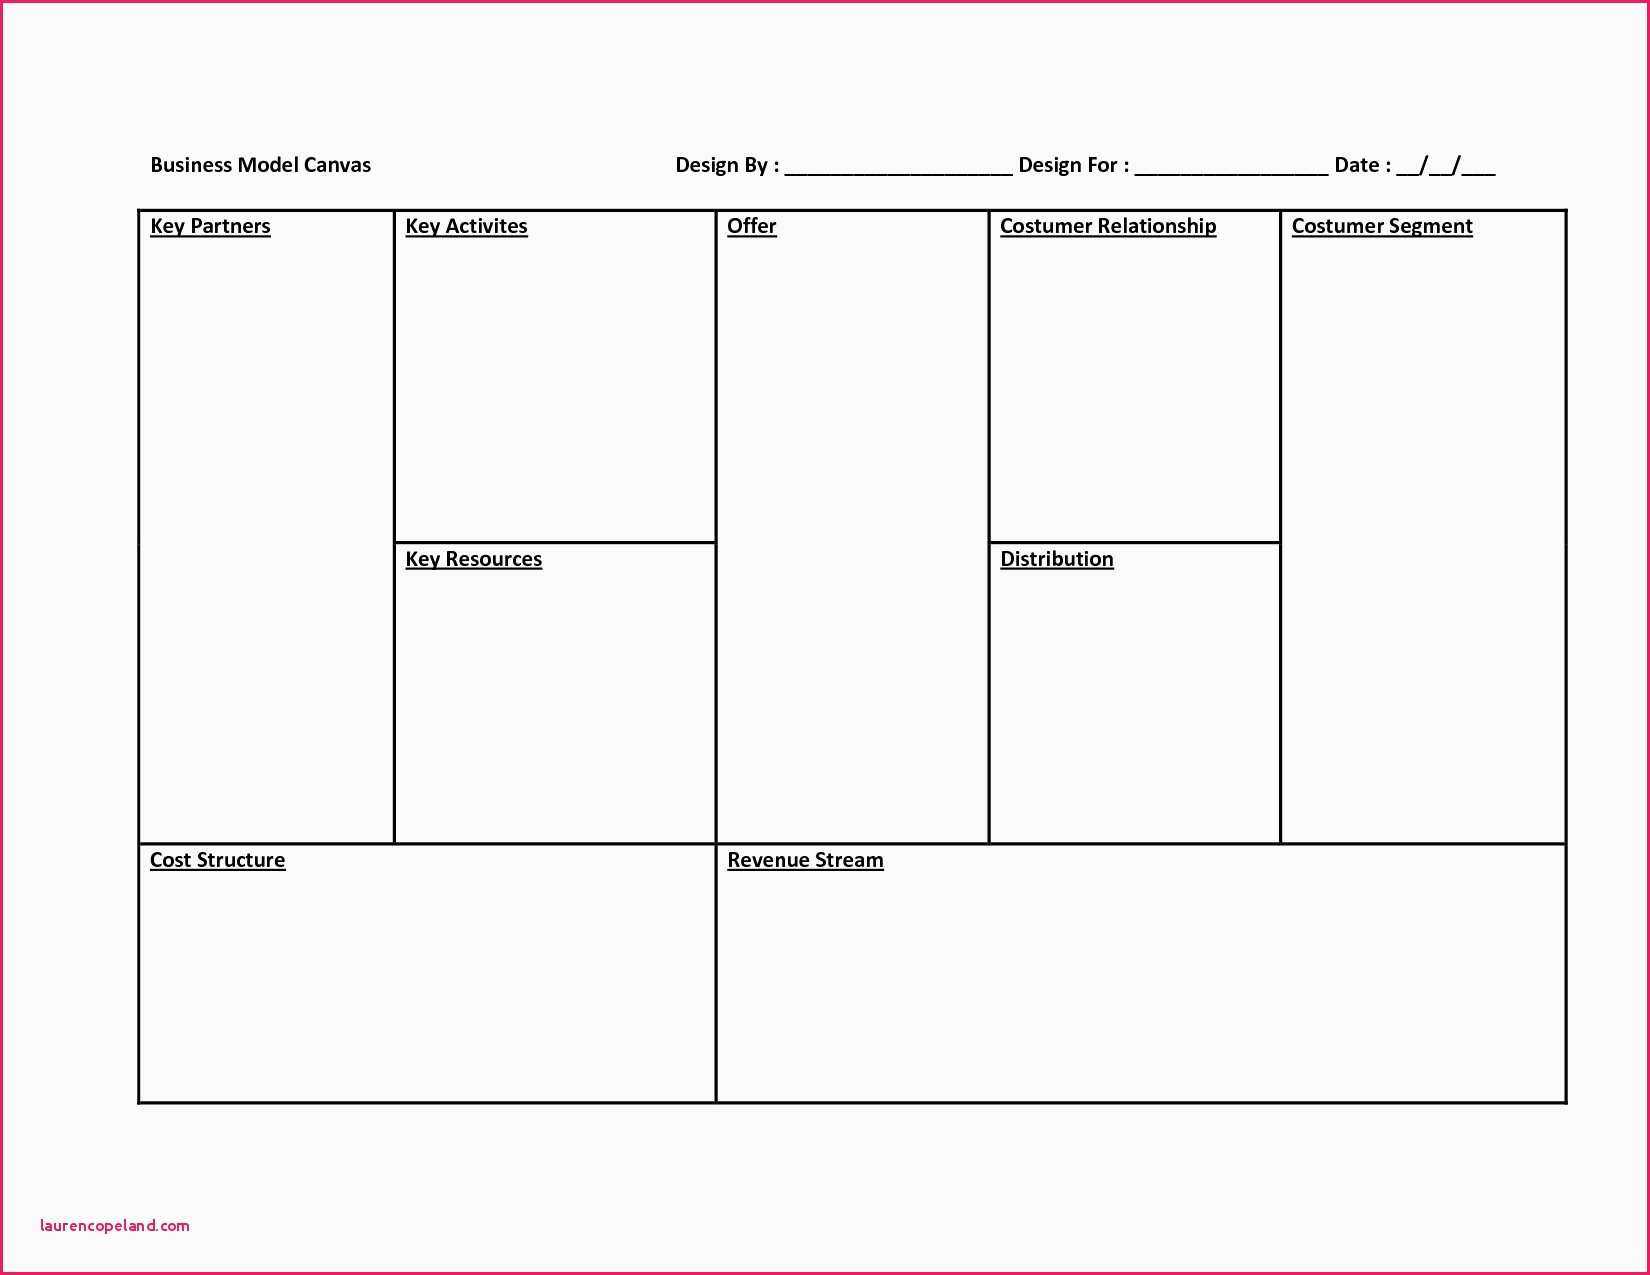 Business Model Canvas Template Word – Atlantaauctionco Pertaining To Business Model Canvas Template Word